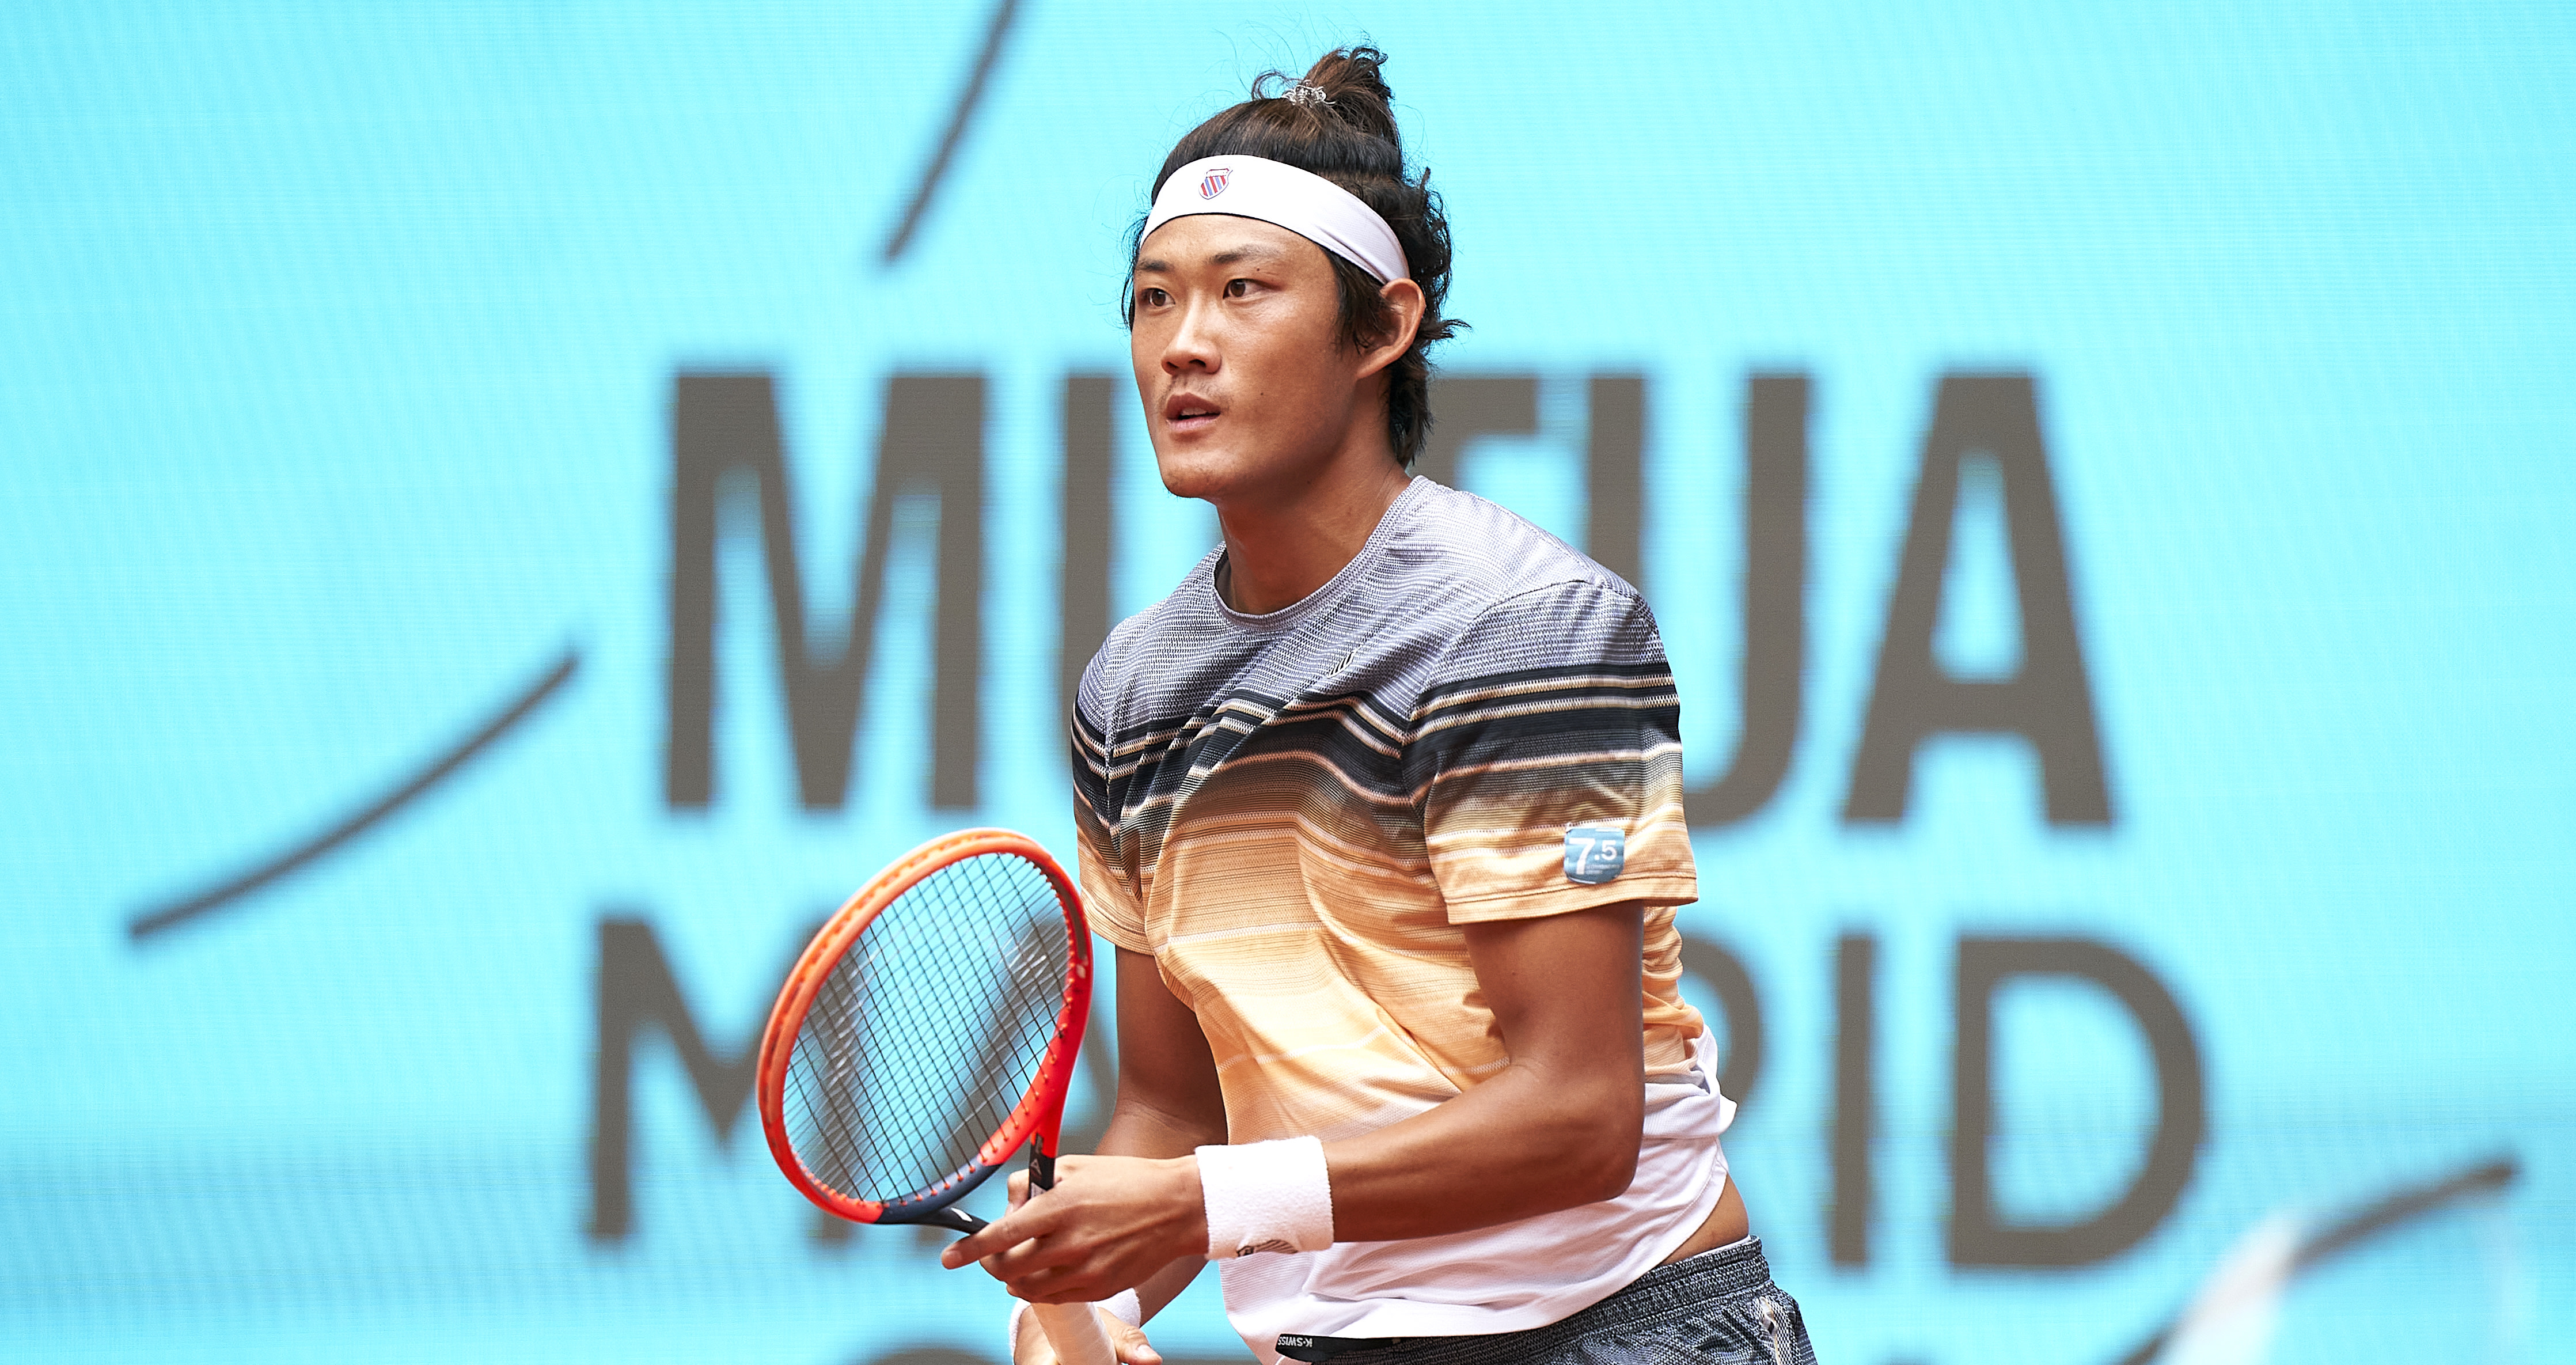 Zhang Zhizhen becomes first Chinese player ever to reach a Masters 1000 quarterfinal